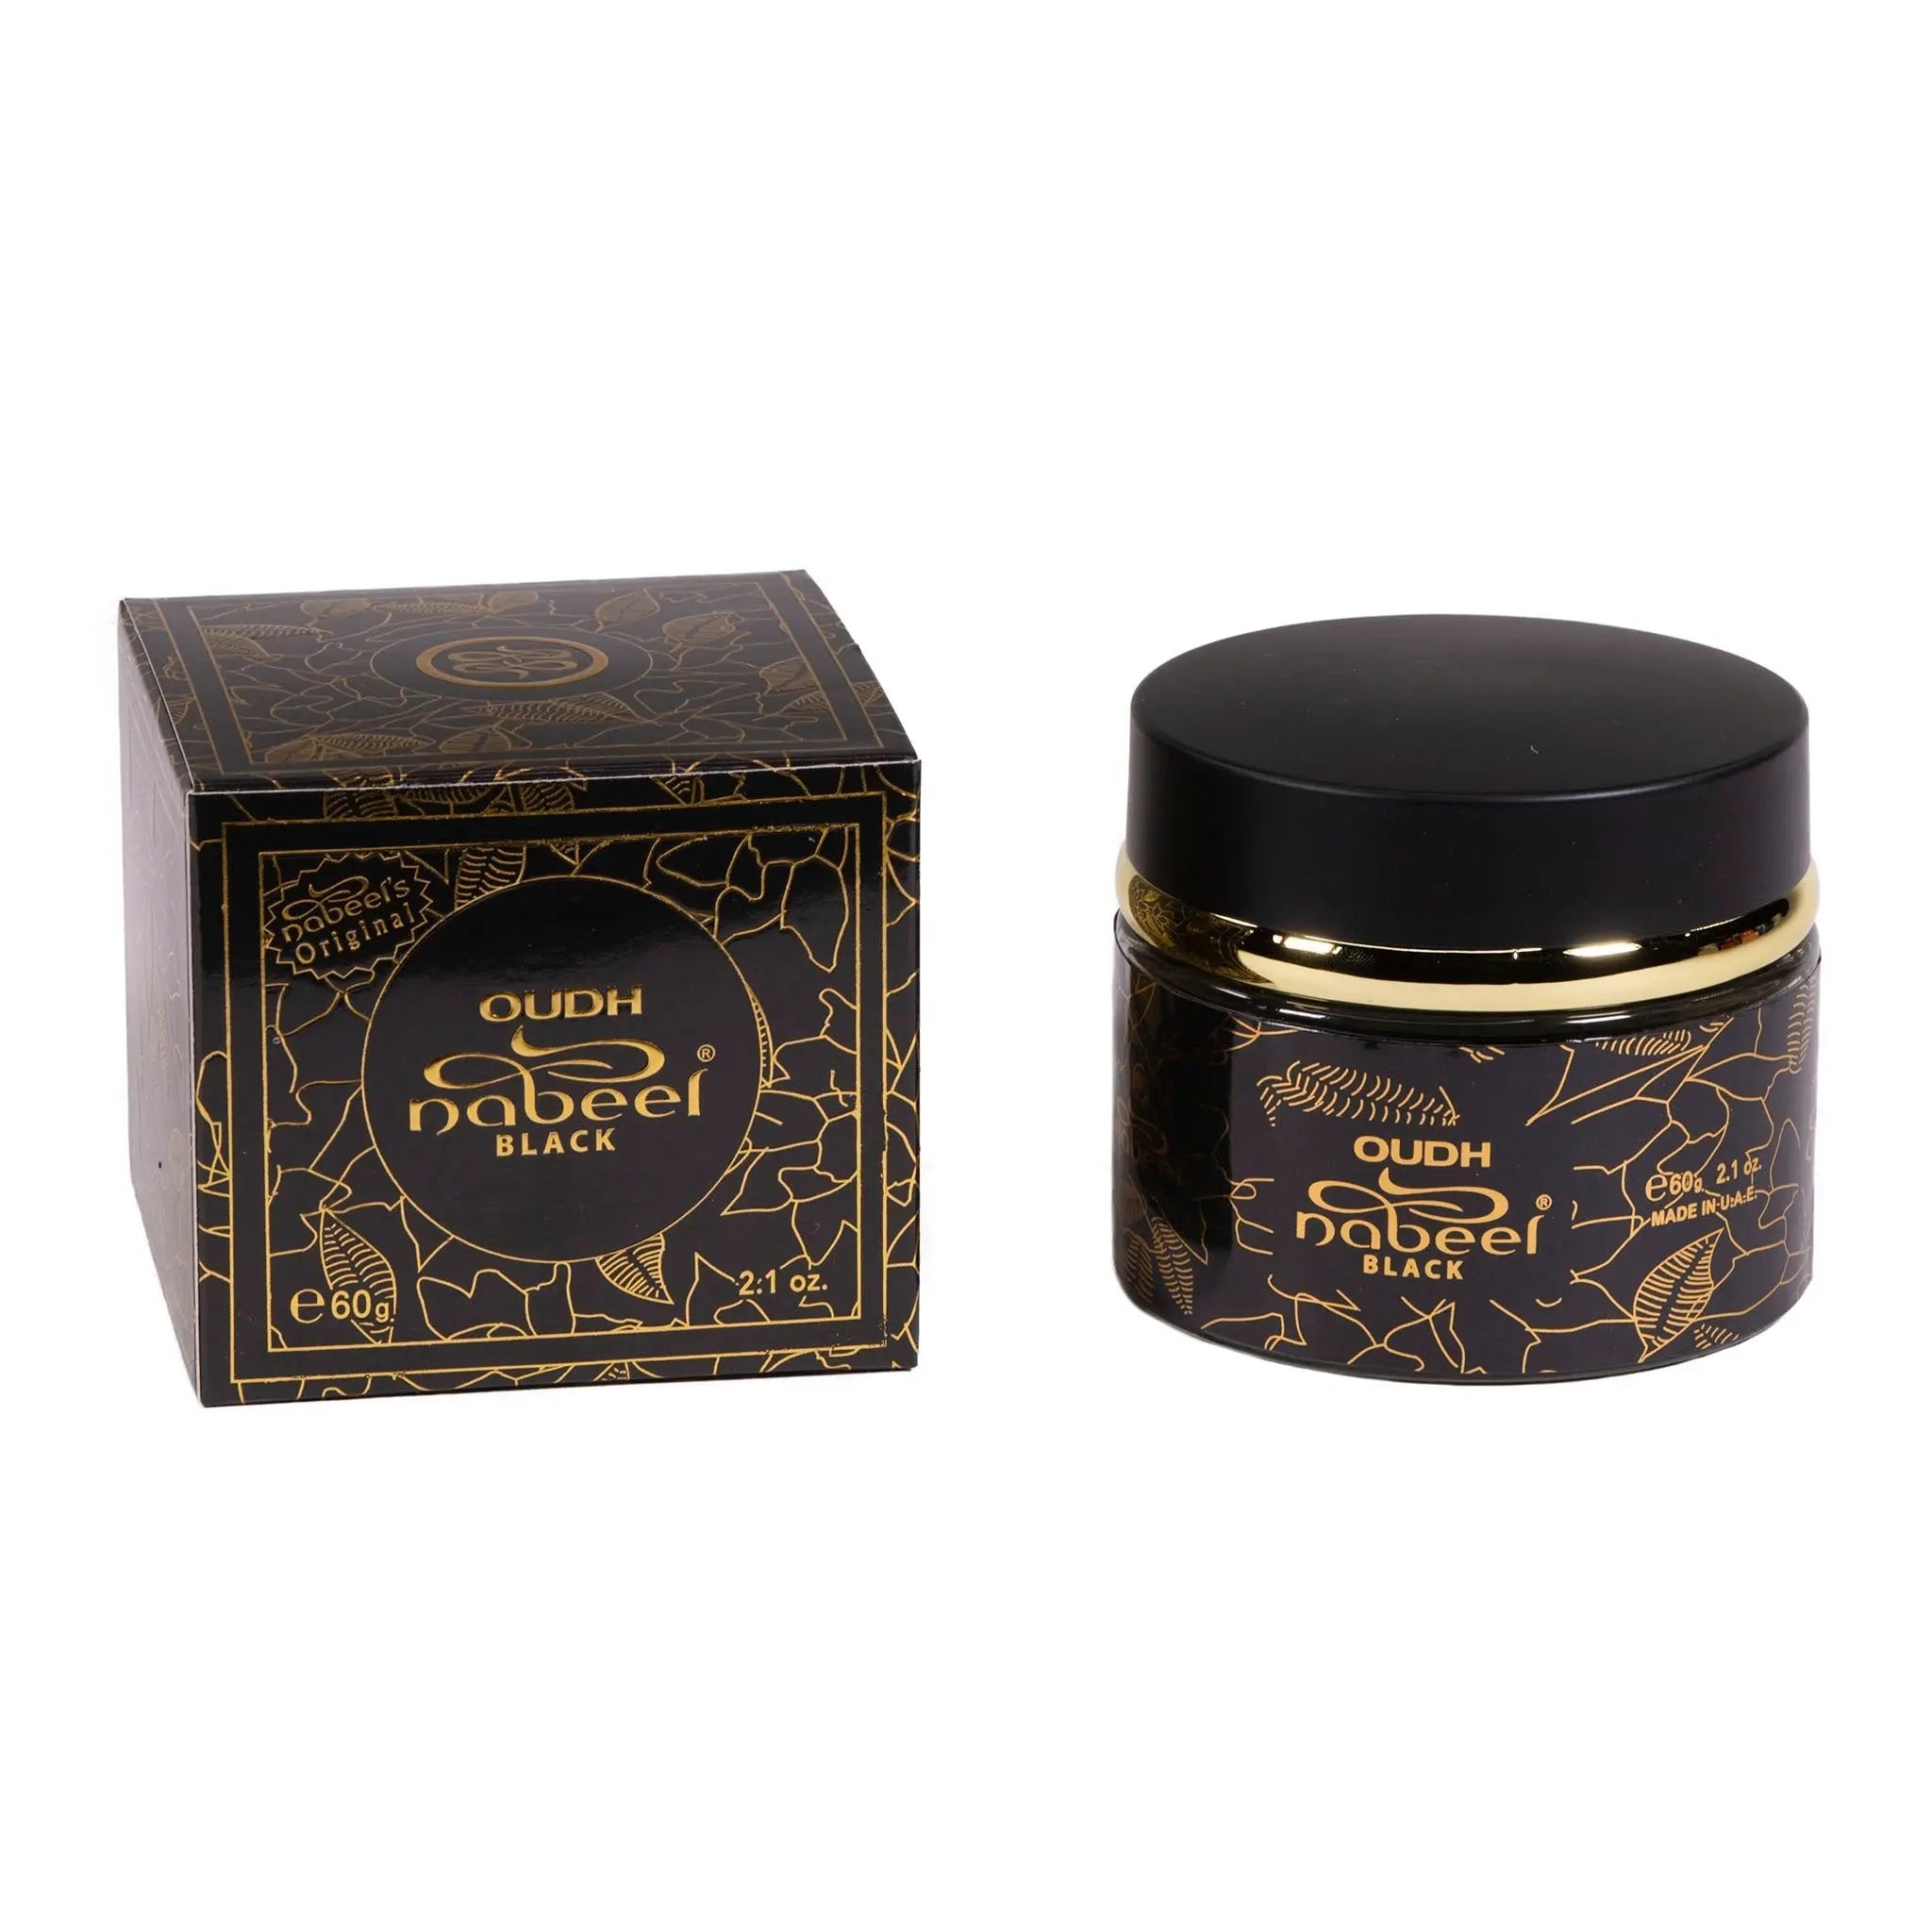 The image features a product from Nabeel Perfumes called "OUDH nabeel BLACK". On the left is a square box with a black base and intricate golden patterns, including what appears to be branches or leaves. The product name is written within a circular golden frame on the box. The box also states the quantity as "60g 2.1 oz." On the right is a matching cylindrical container with a black lid, also adorned with golden patterns and detailing that echoes the design on the box.